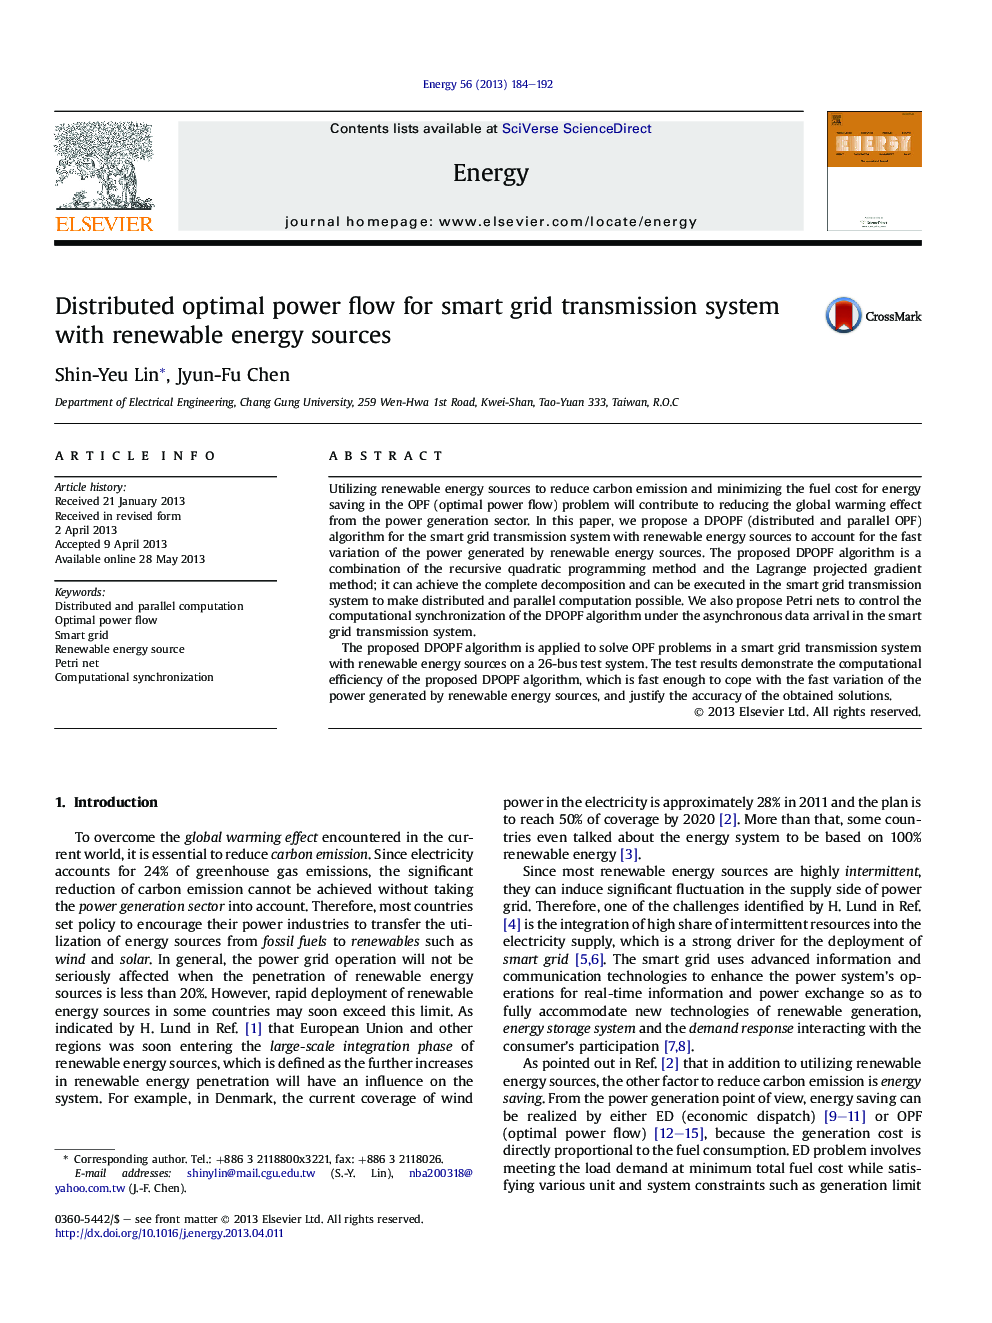 Distributed optimal power flow for smart grid transmission system with renewable energy sources